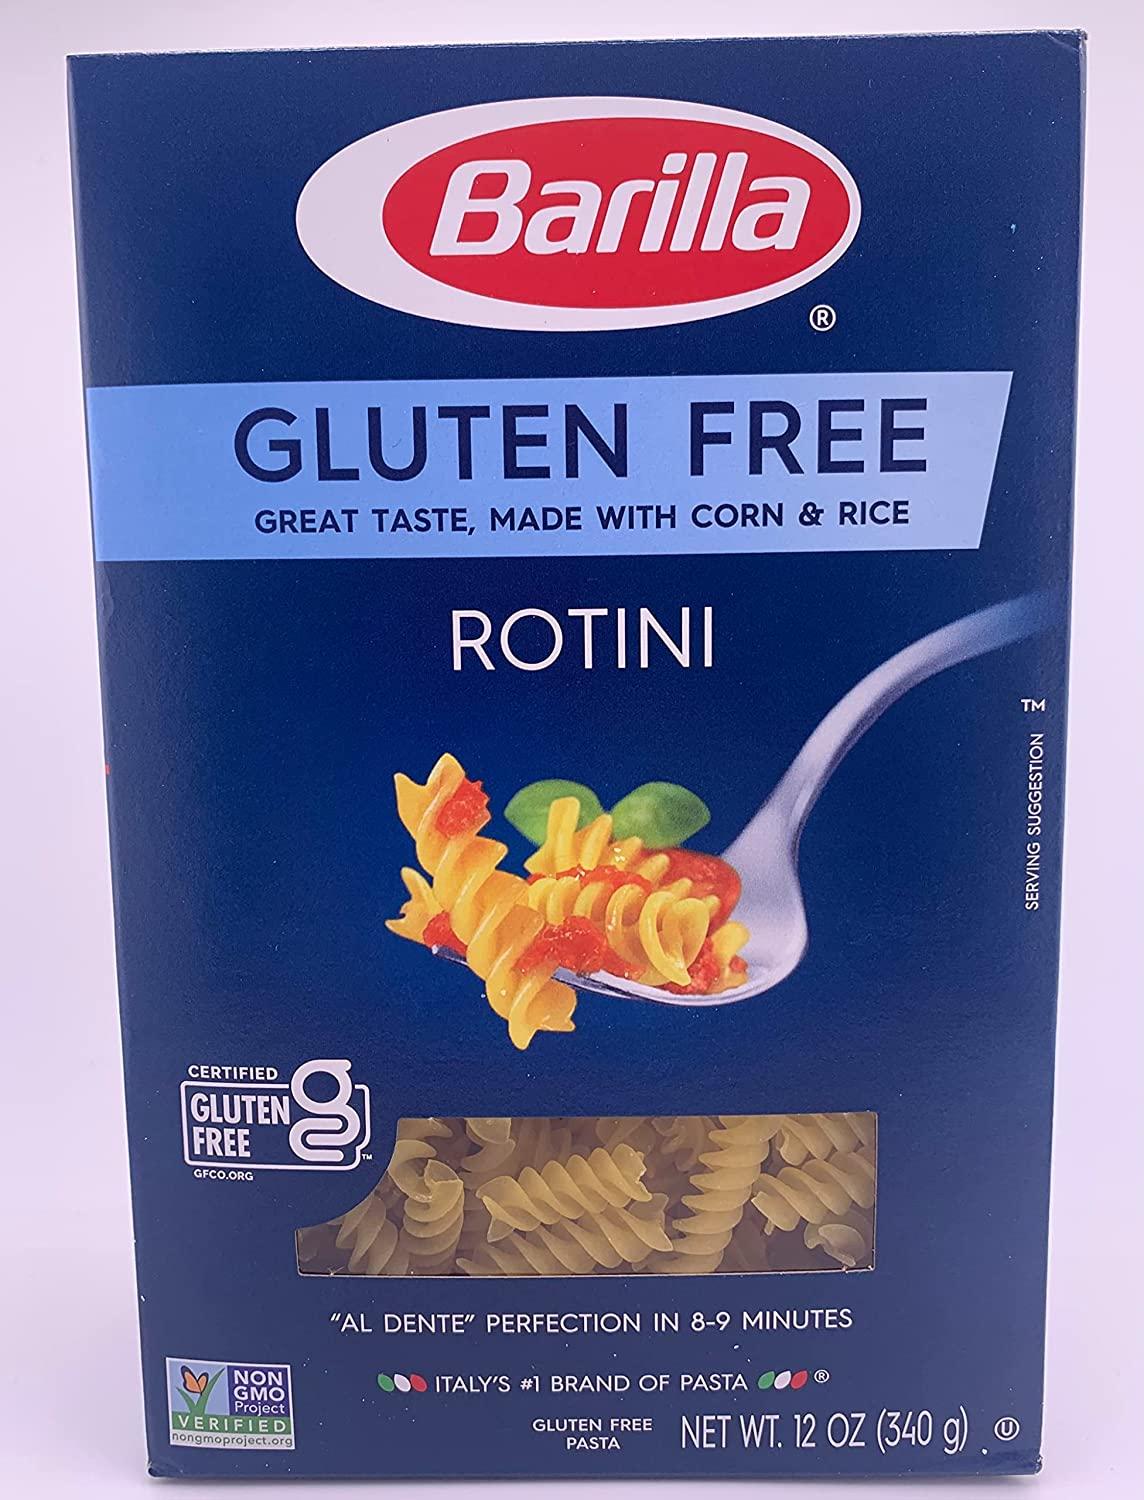 Barilla Gluten Free Pasta Variety Pack- Includes Penne Pasta, Rotini Pasta,  and Elbow Macaroni Pasta Noodles. Barilla Pasta Bulk Set by Inspired Candy  (3 x 12oz